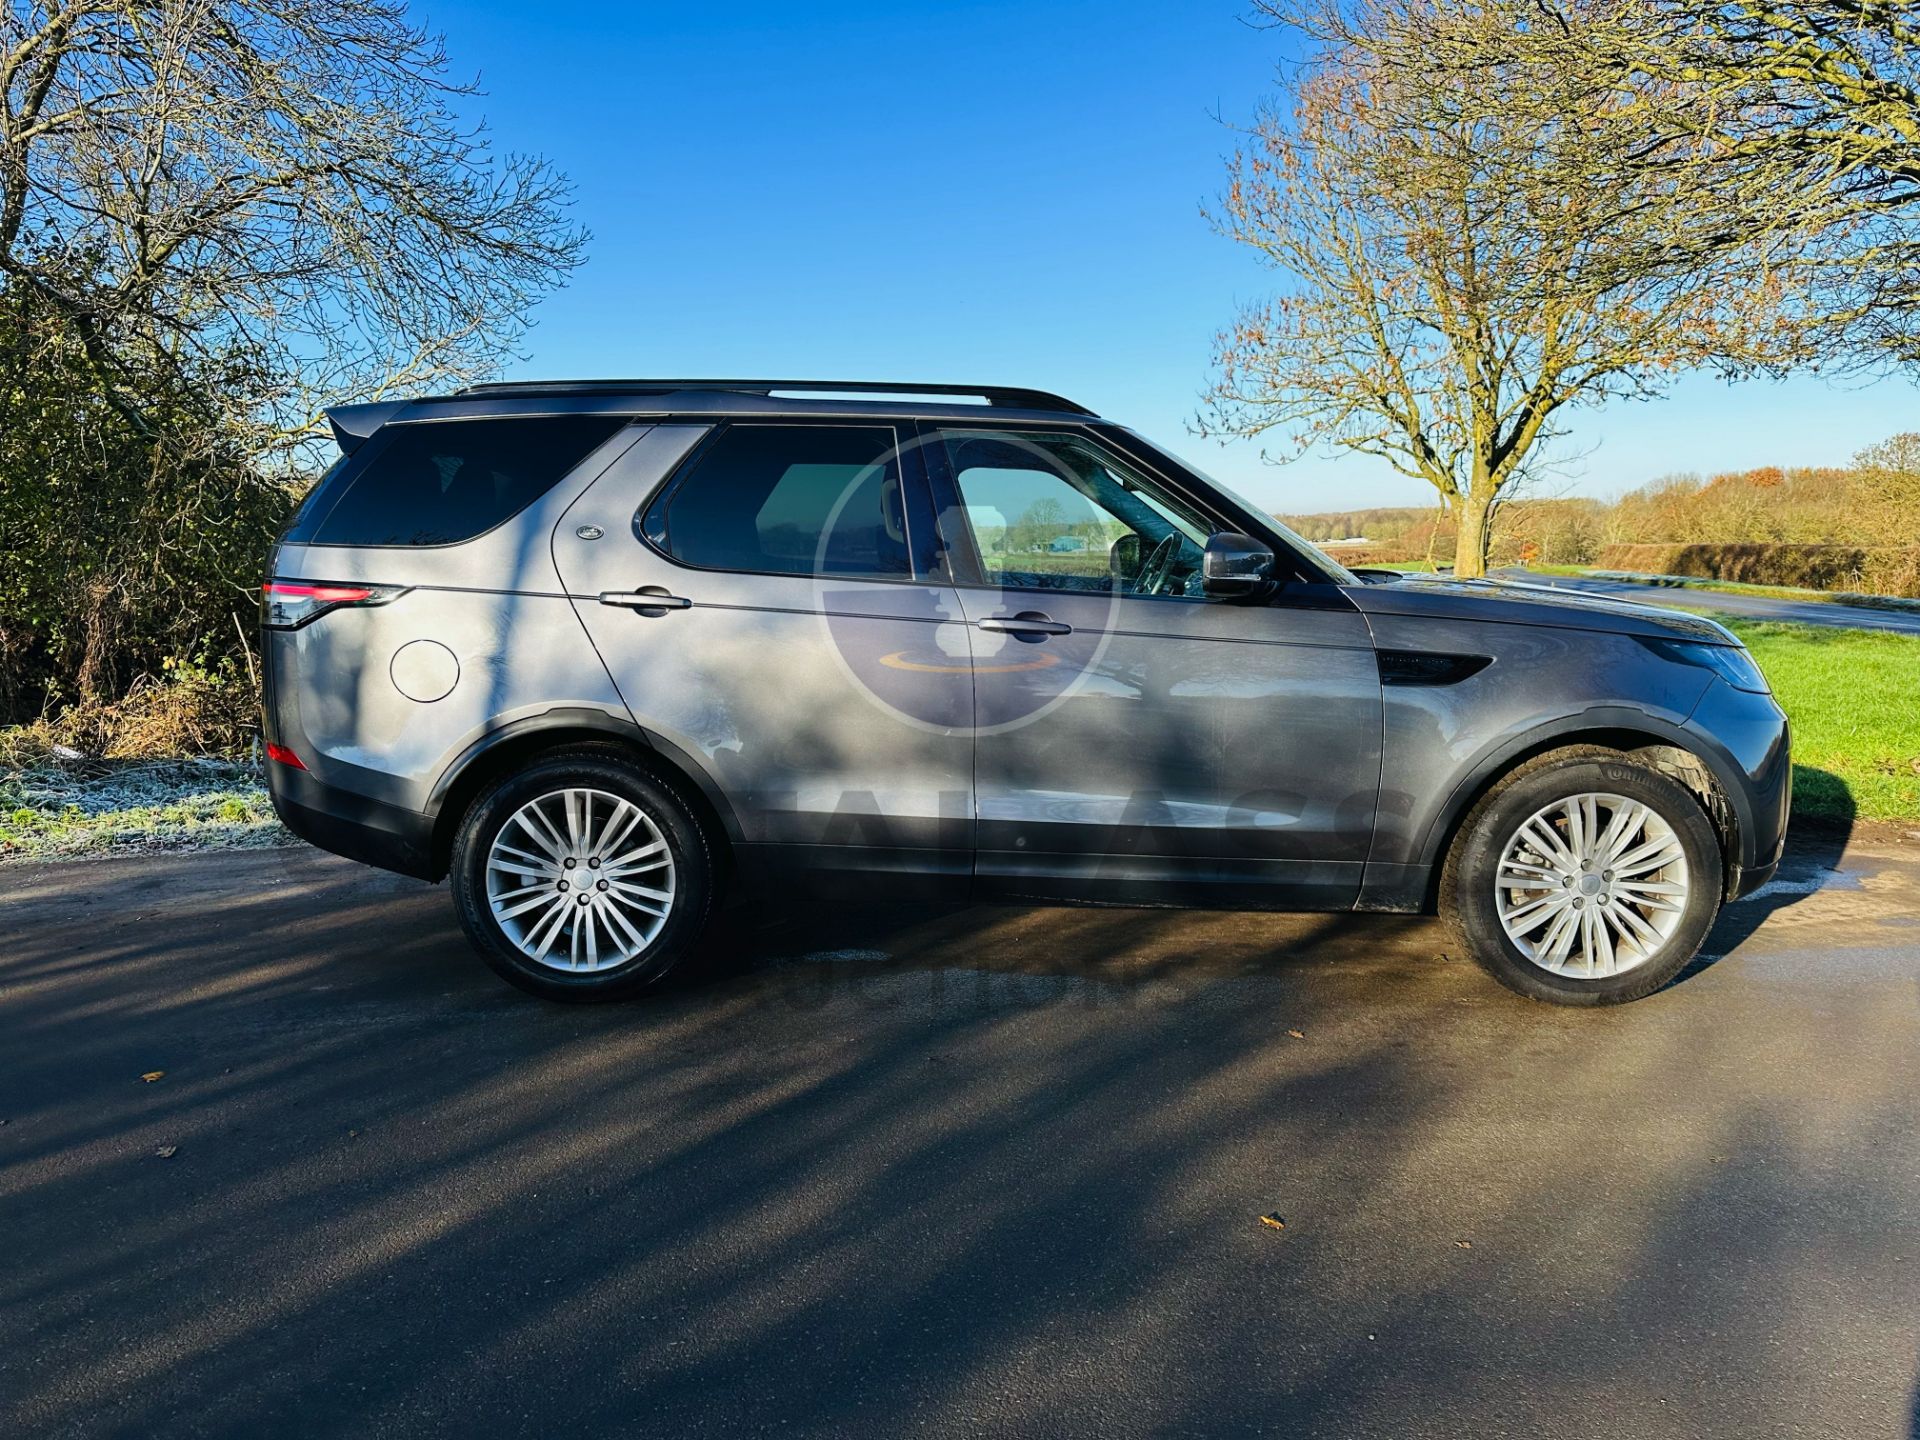 (ON SALE) LAND ROVER DISCOVERY 5 "AUTO DIESEL - 7 SEATER SUV - 2019 MODEL - ONLY 22K MILES FROM NEW - Image 14 of 41